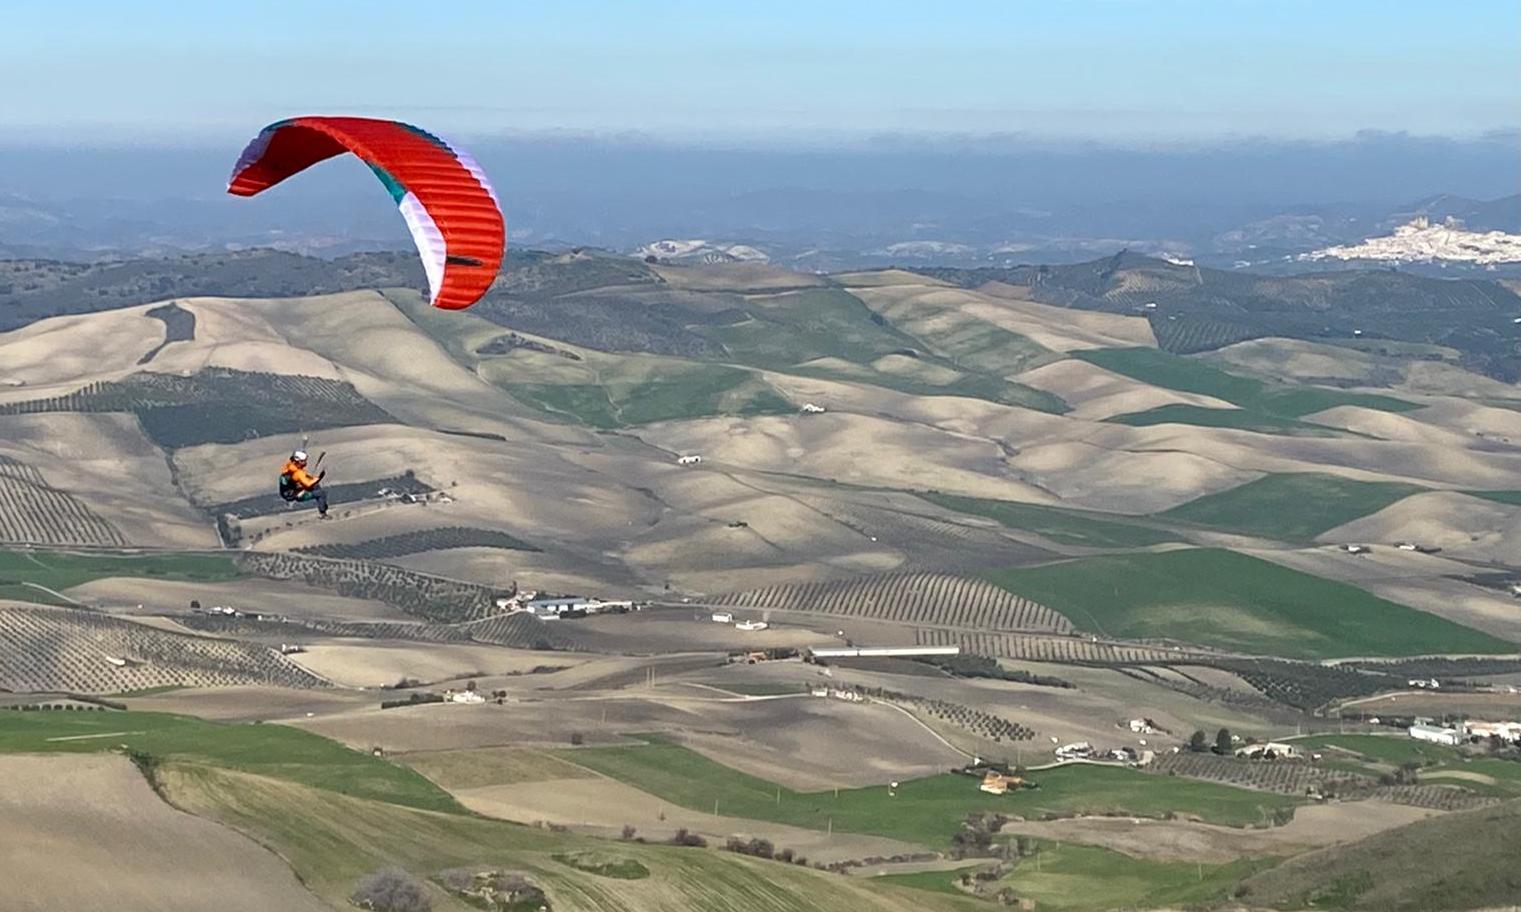 New paragliding training group qualifies with flying colours in January 2023